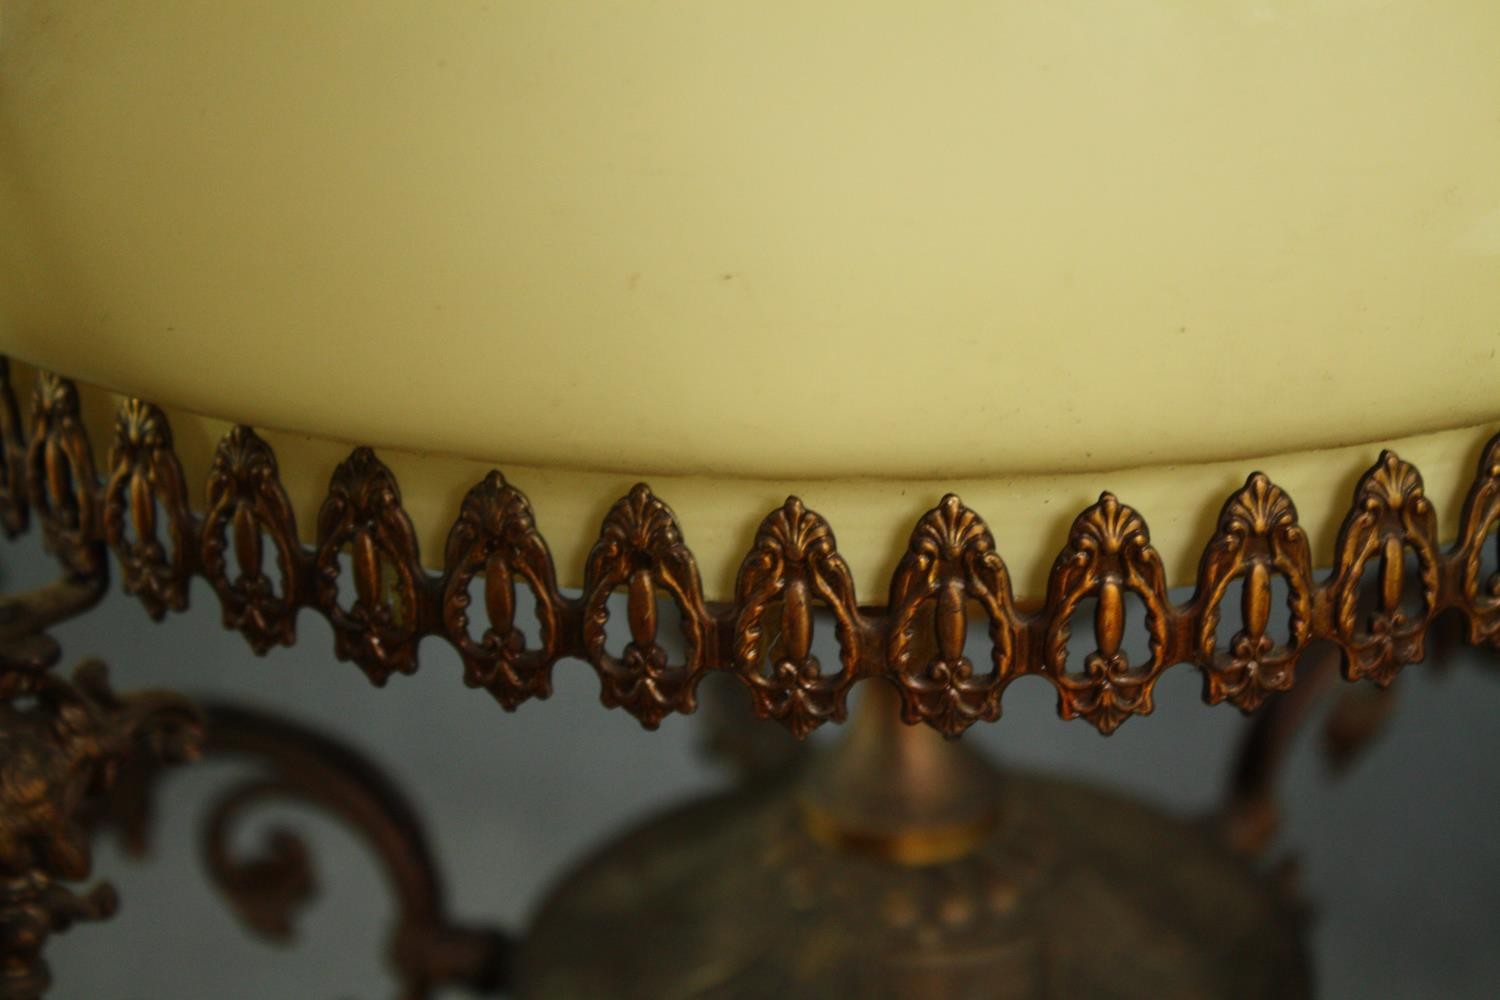 A vintage ceiling light in the style of an oil lantern. H.100cm. - Image 4 of 9